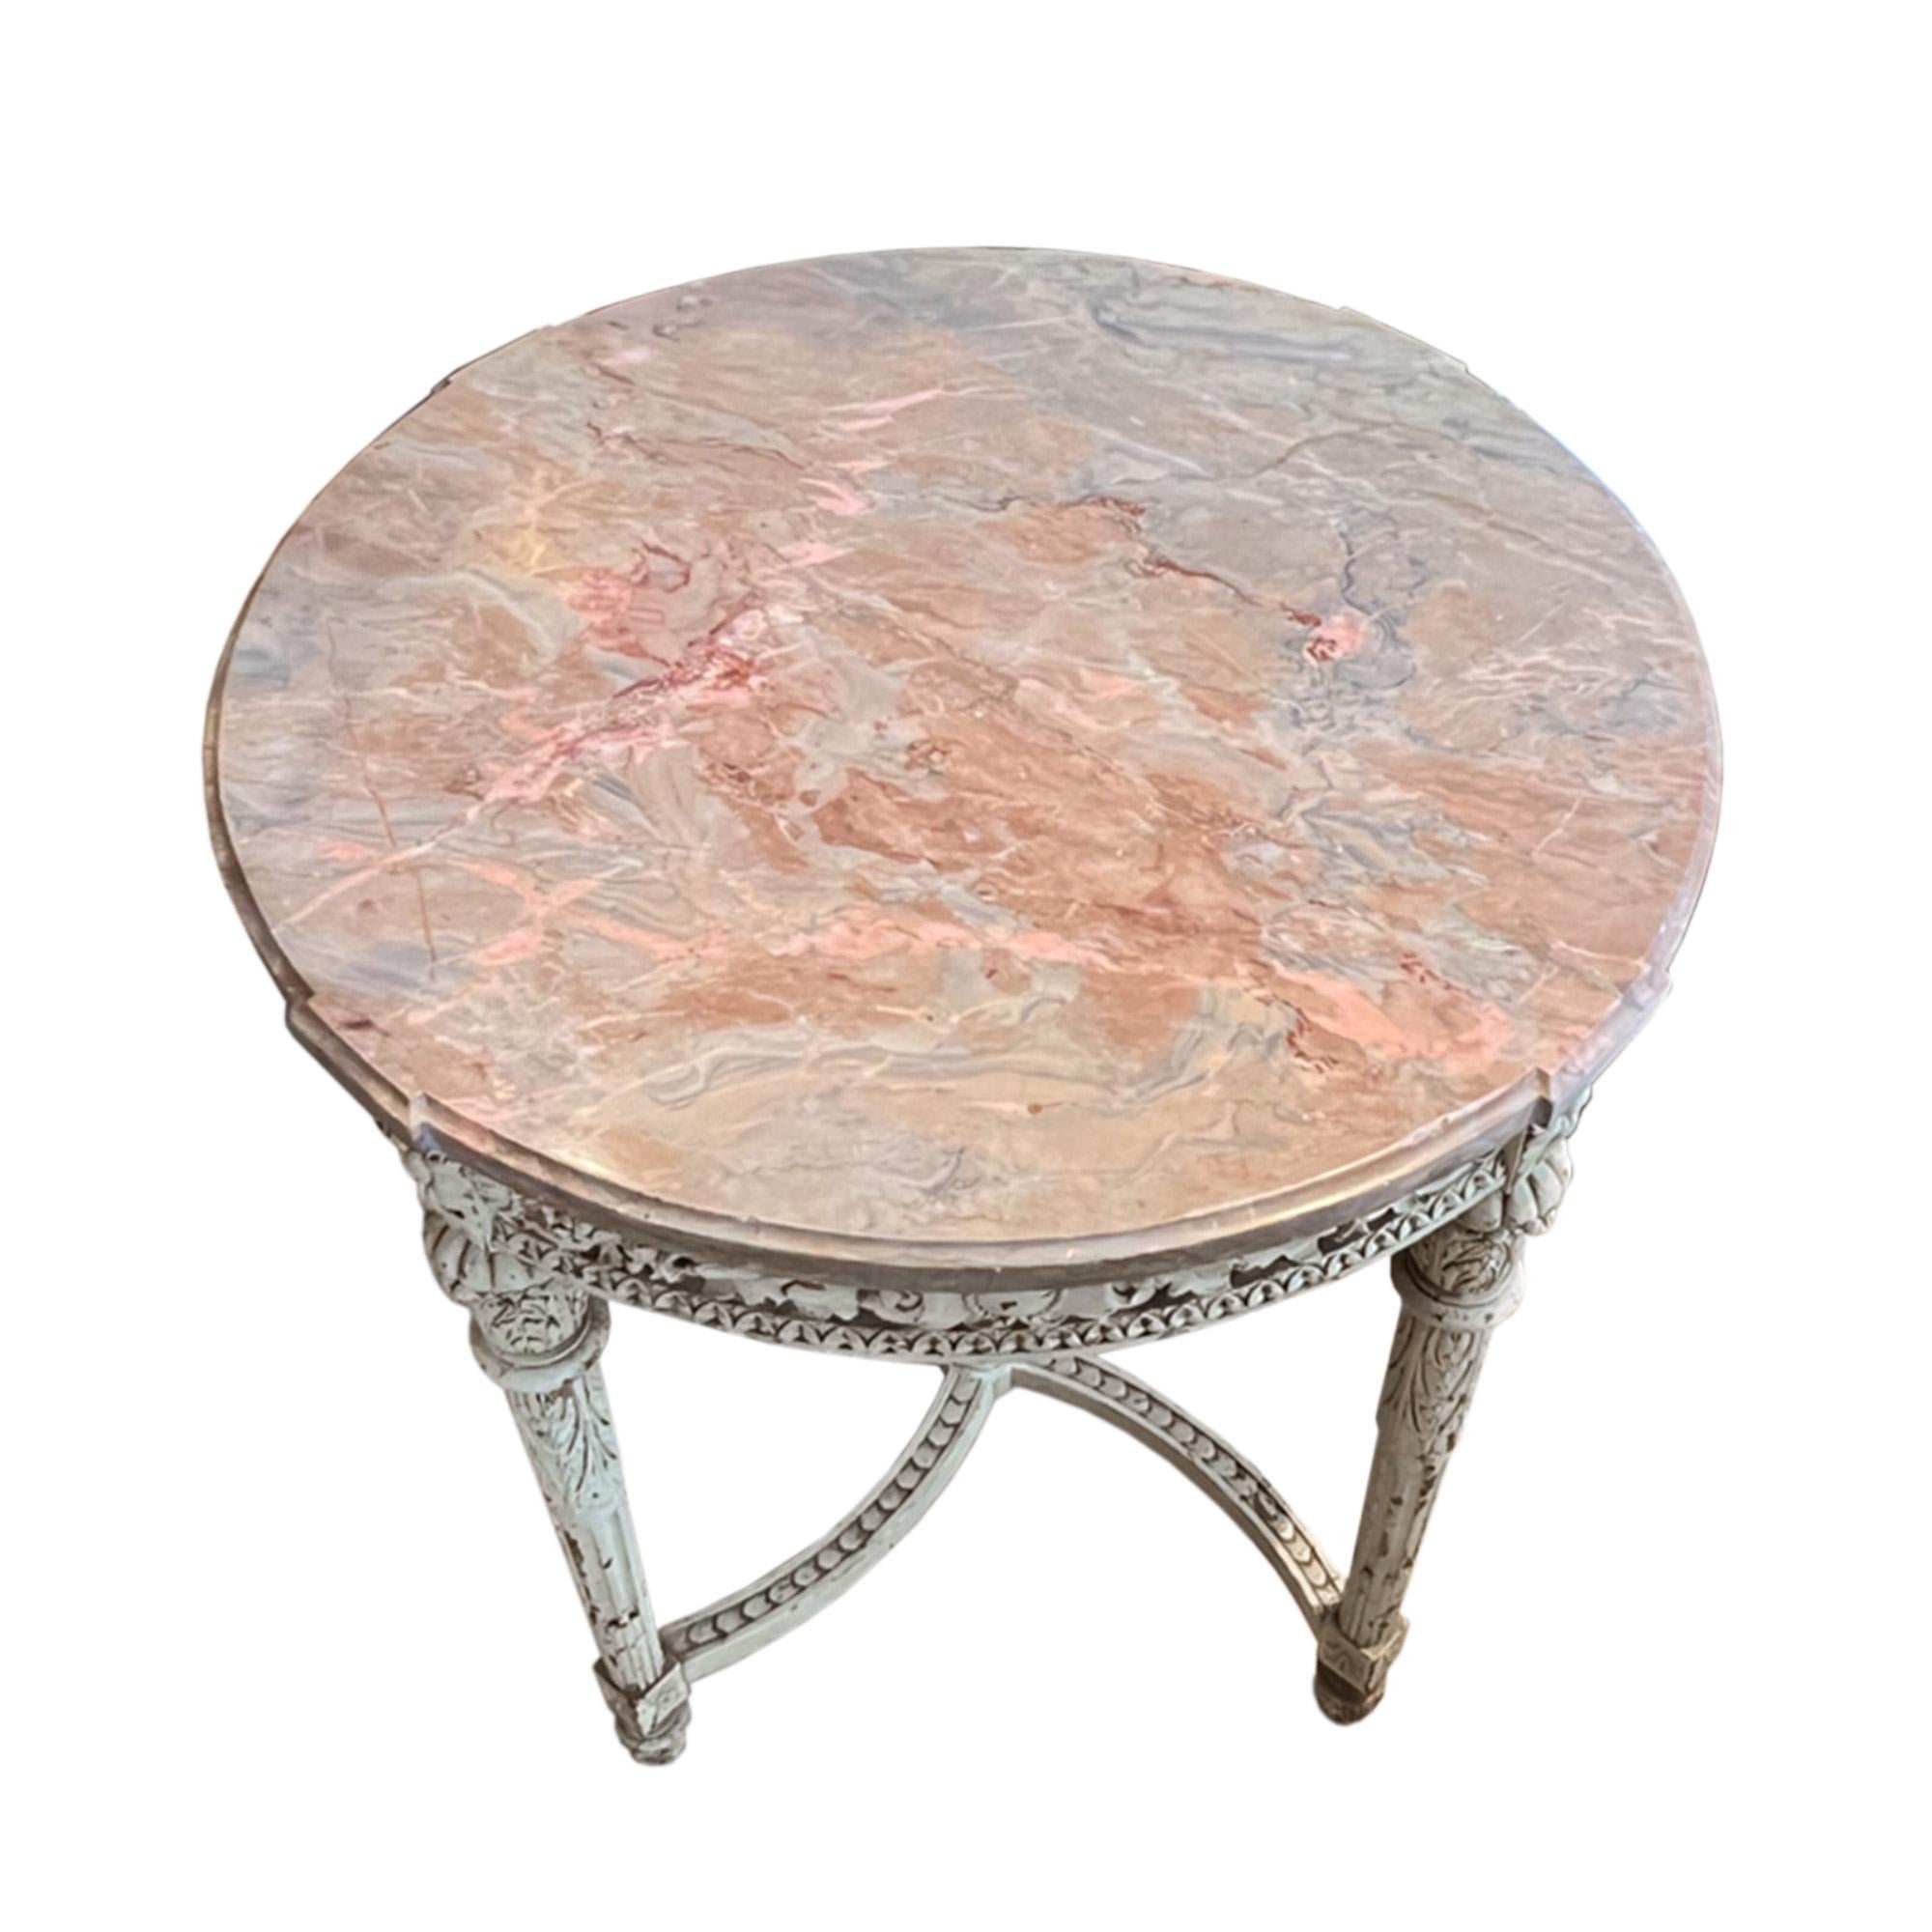 This is a beautiful gueridon with a propeller base - it's made from carved wood with the original paint and has a marble top with a pink hue.

A lovely centre table that was made in France in the 19th century.

Perfect for a hallway, or reception